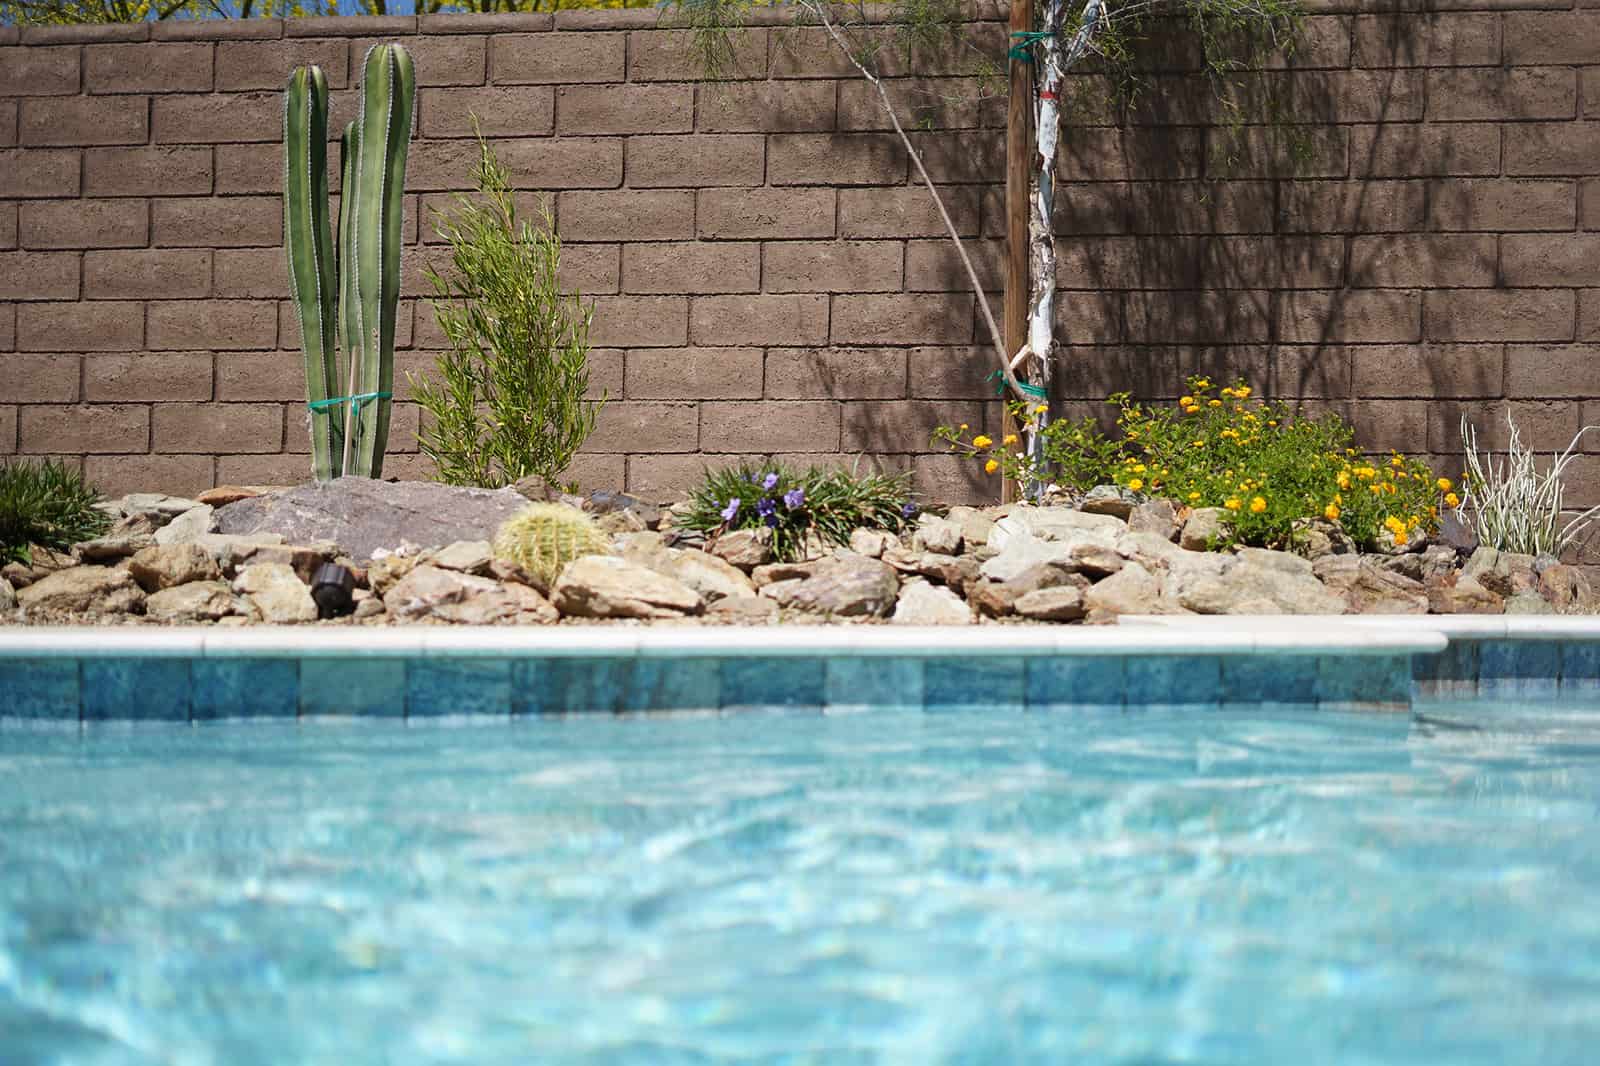 What are the benefits of pool landscaping?